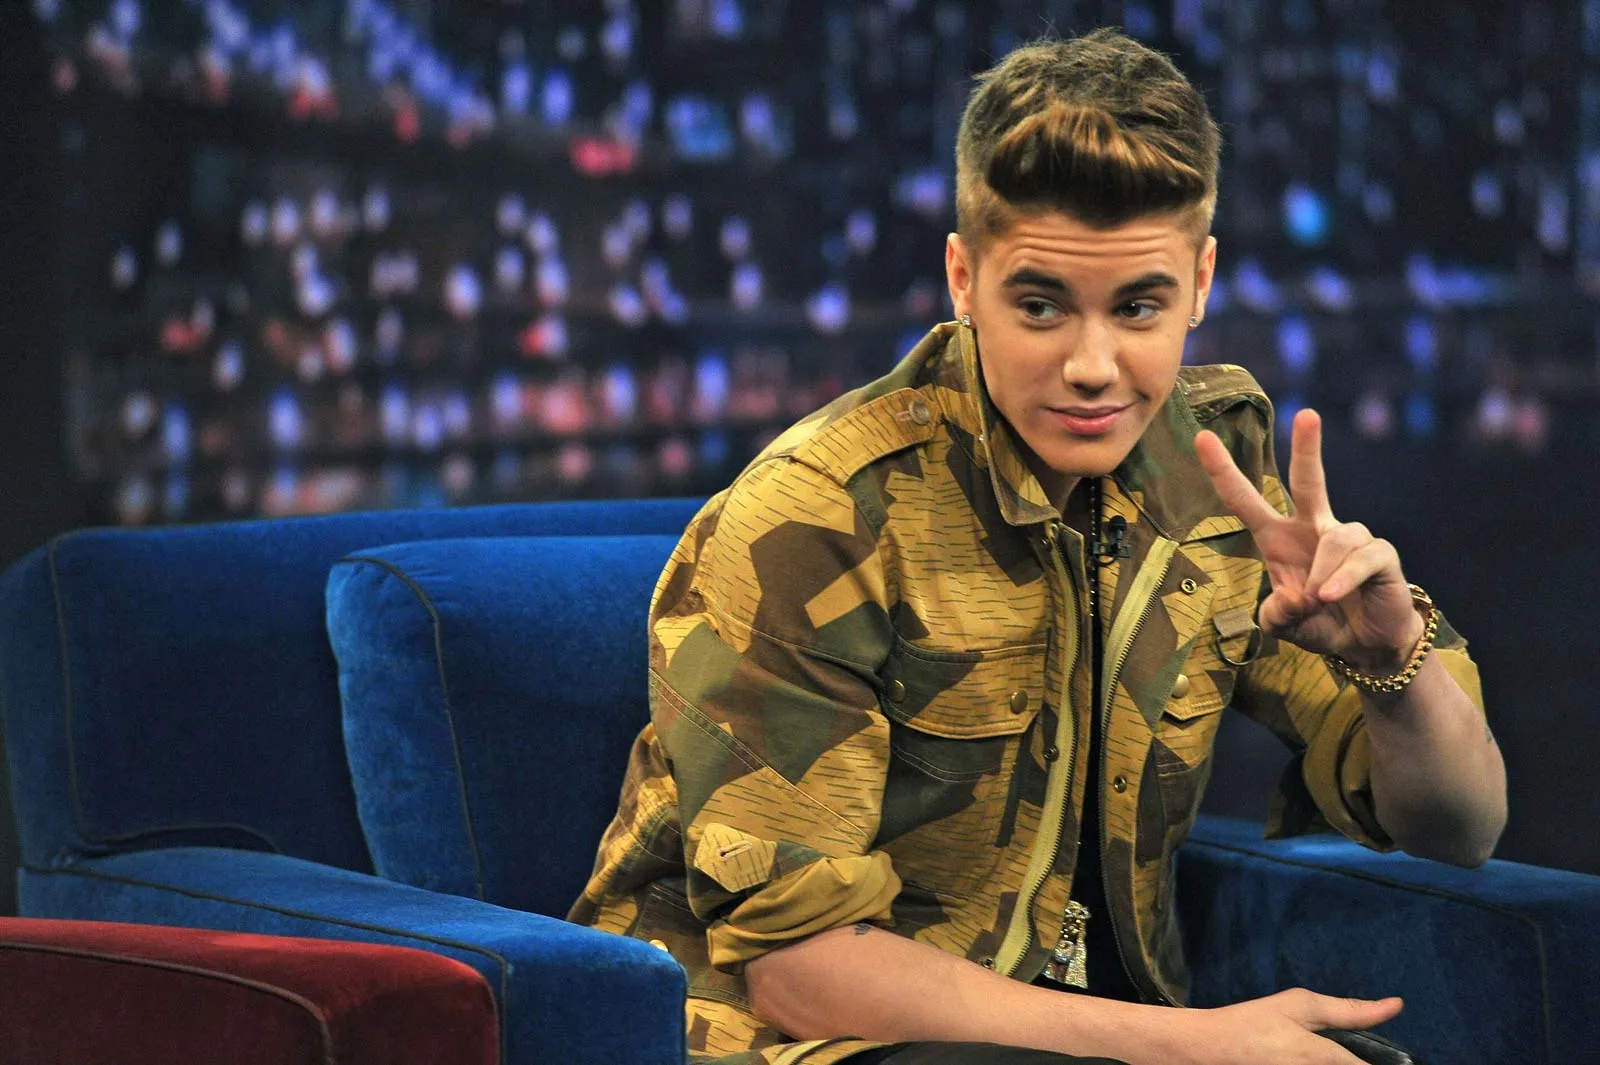 Justin Bieber is a top international personality with millions of followers from all across the world.